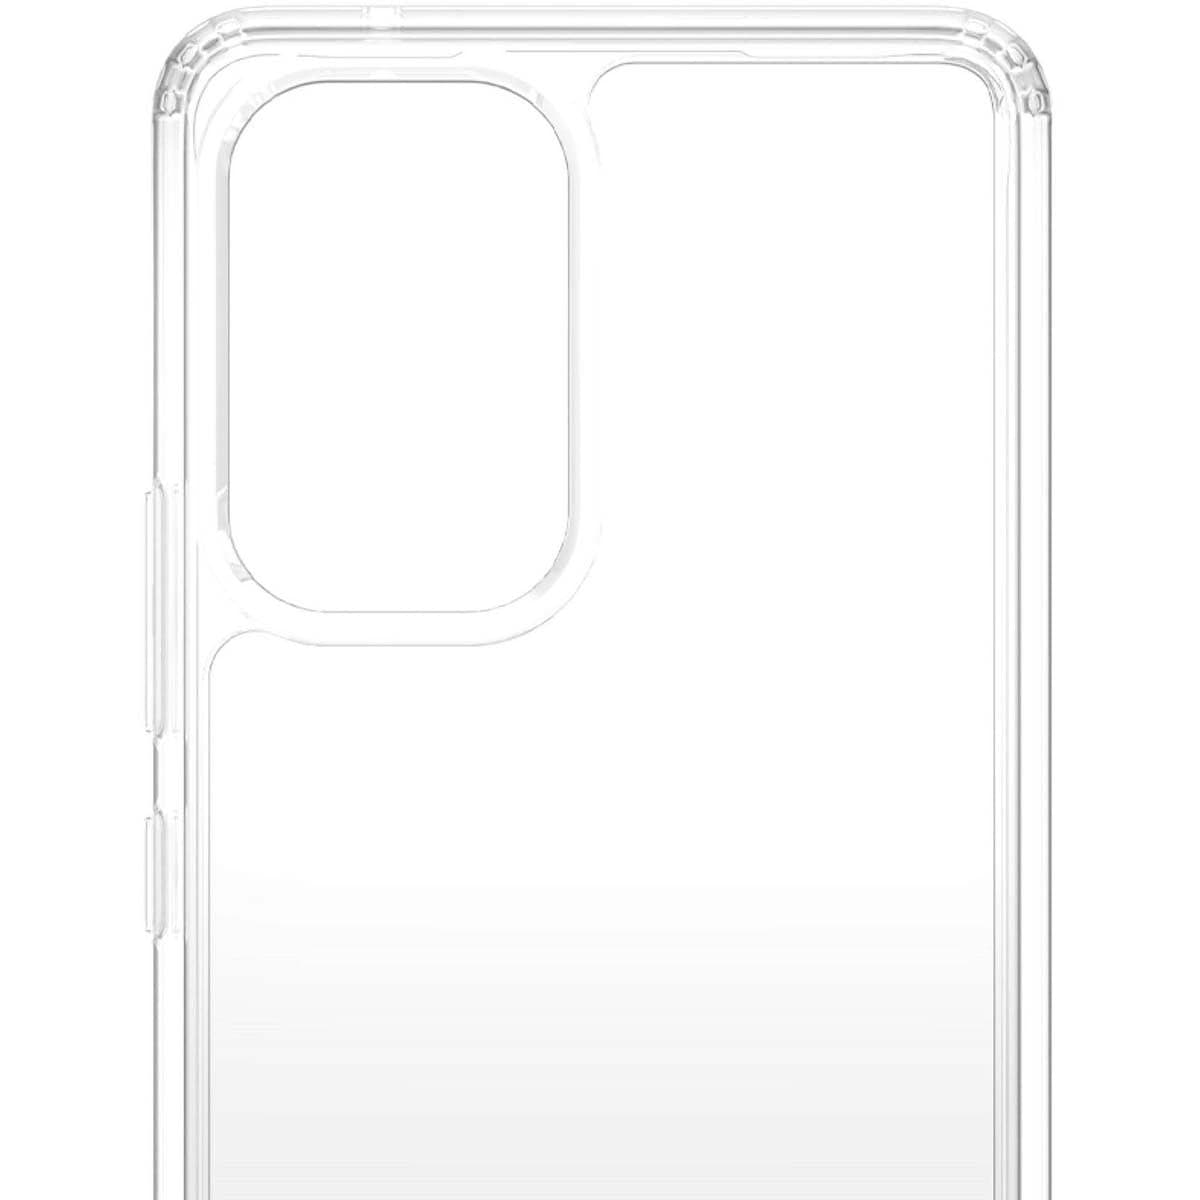 PanzerGlass AB HardCase for Samsung Galaxy S20 - Clear.